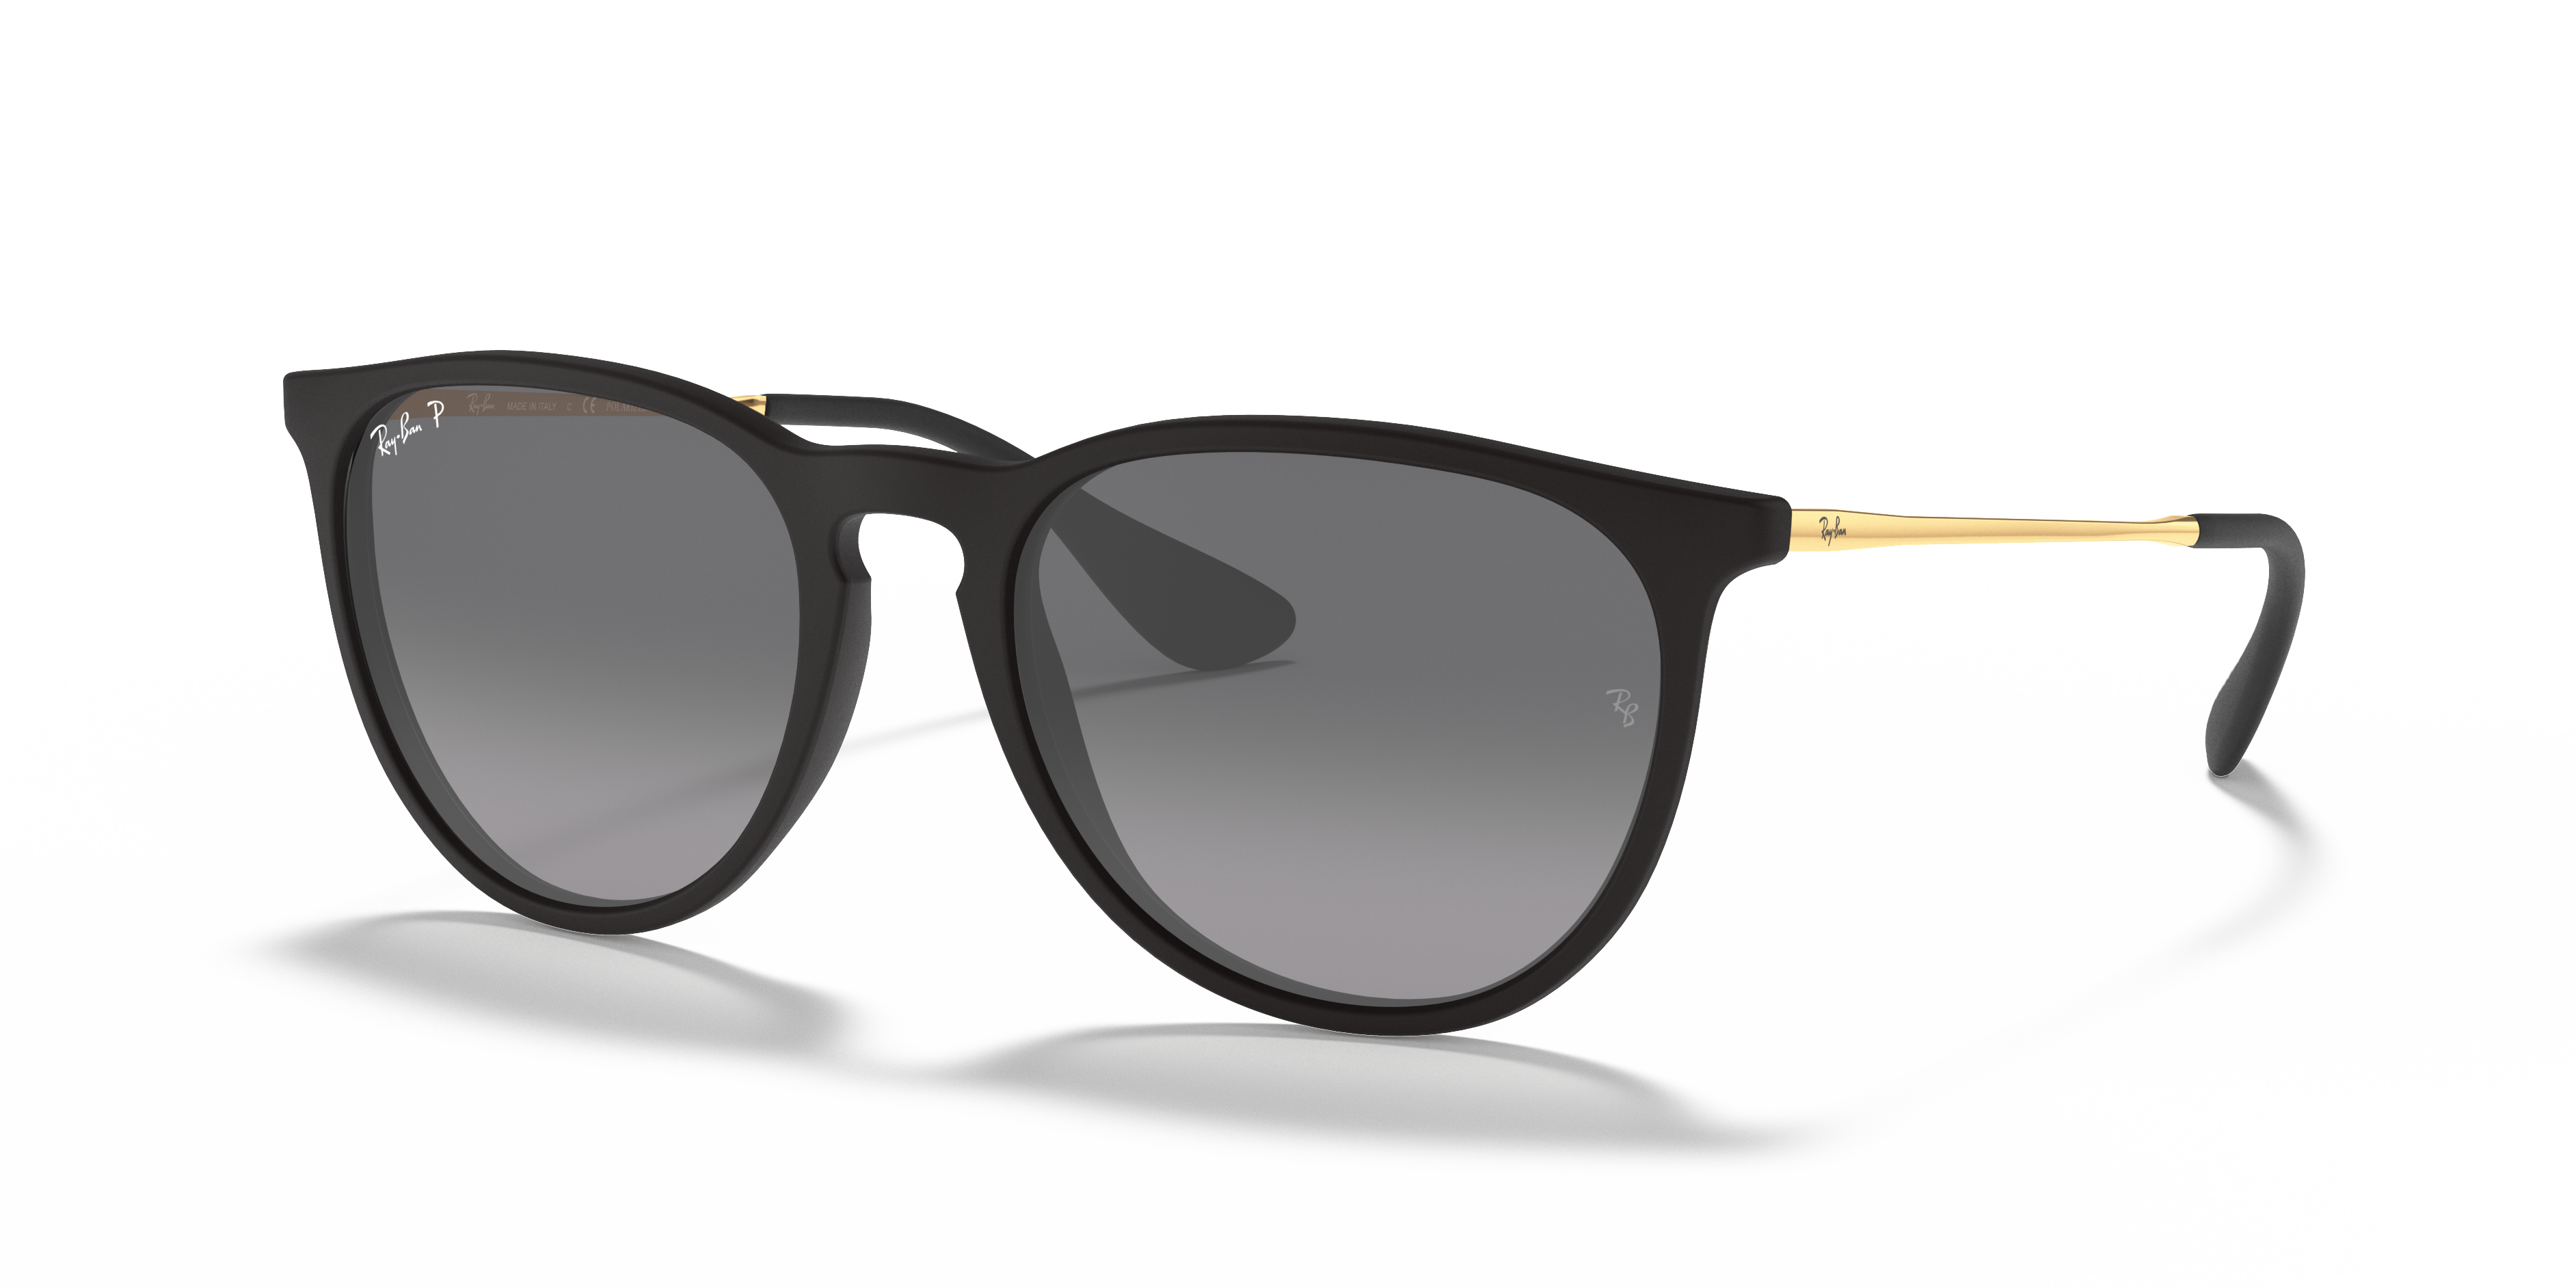 ERIKA @COLLECTION Sunglasses in Black and Black - RB4171 | Ray-Ban® US